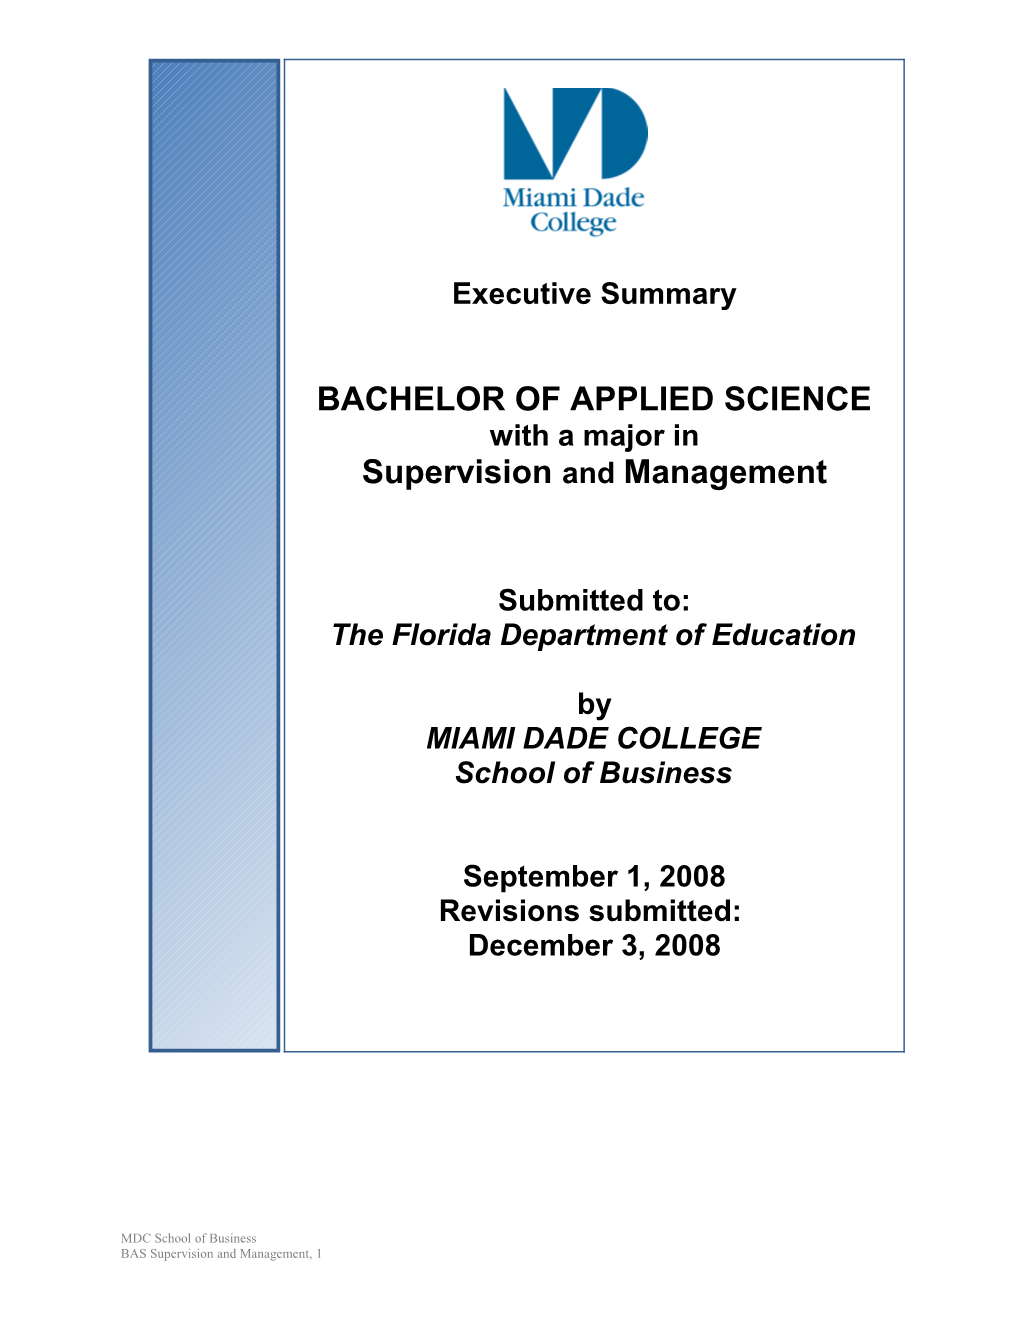 BACHELOR of APPLIED SCIENCE with a Major In